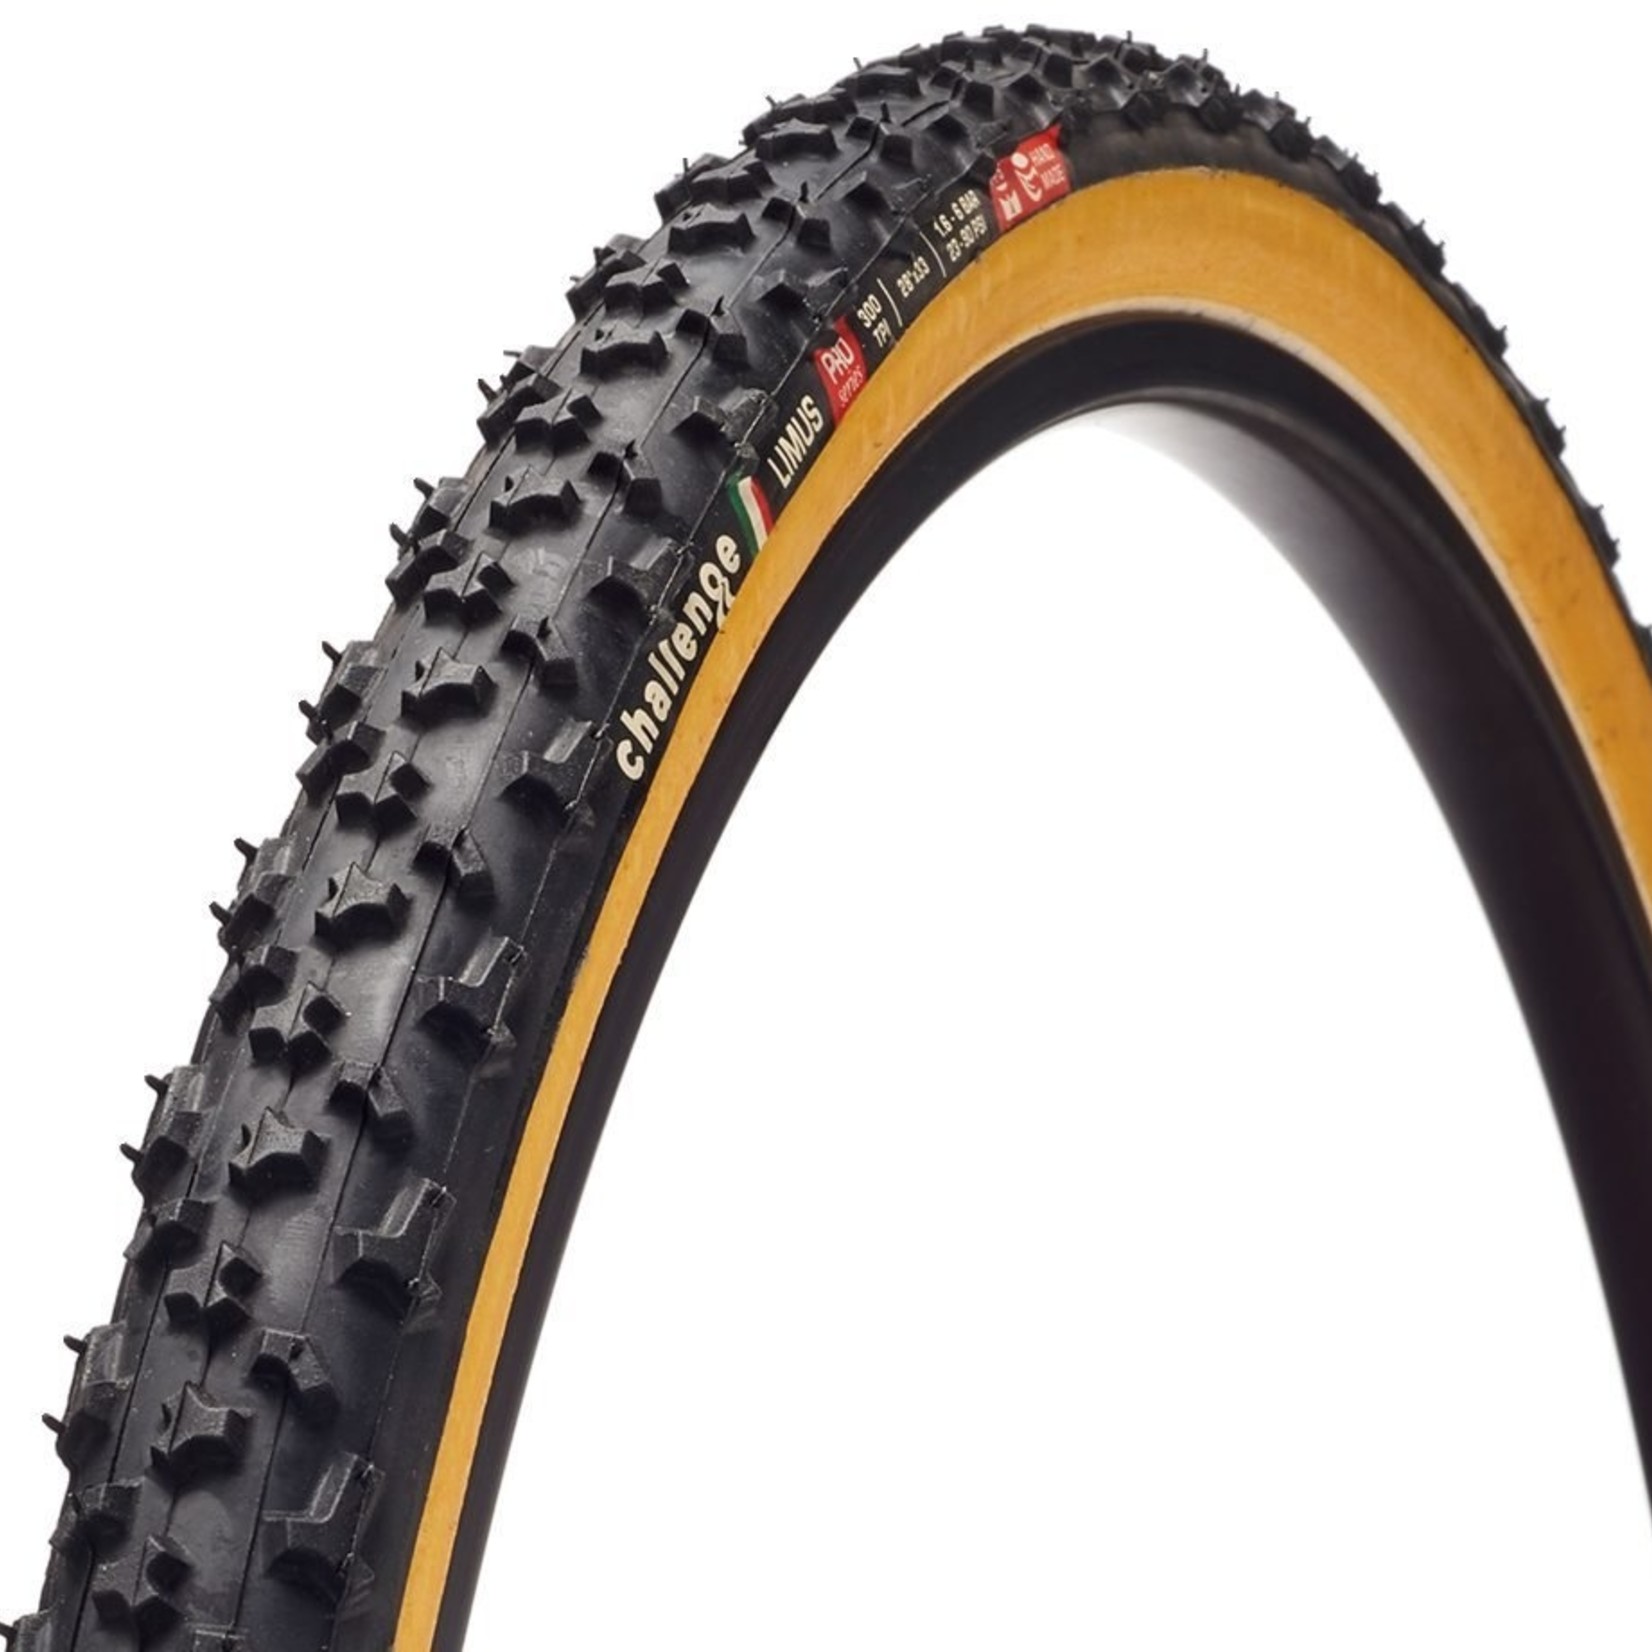 Challenge Challenge, Limus Pro Race TLR Tubeless Ready Tire, 700 x 33, tan